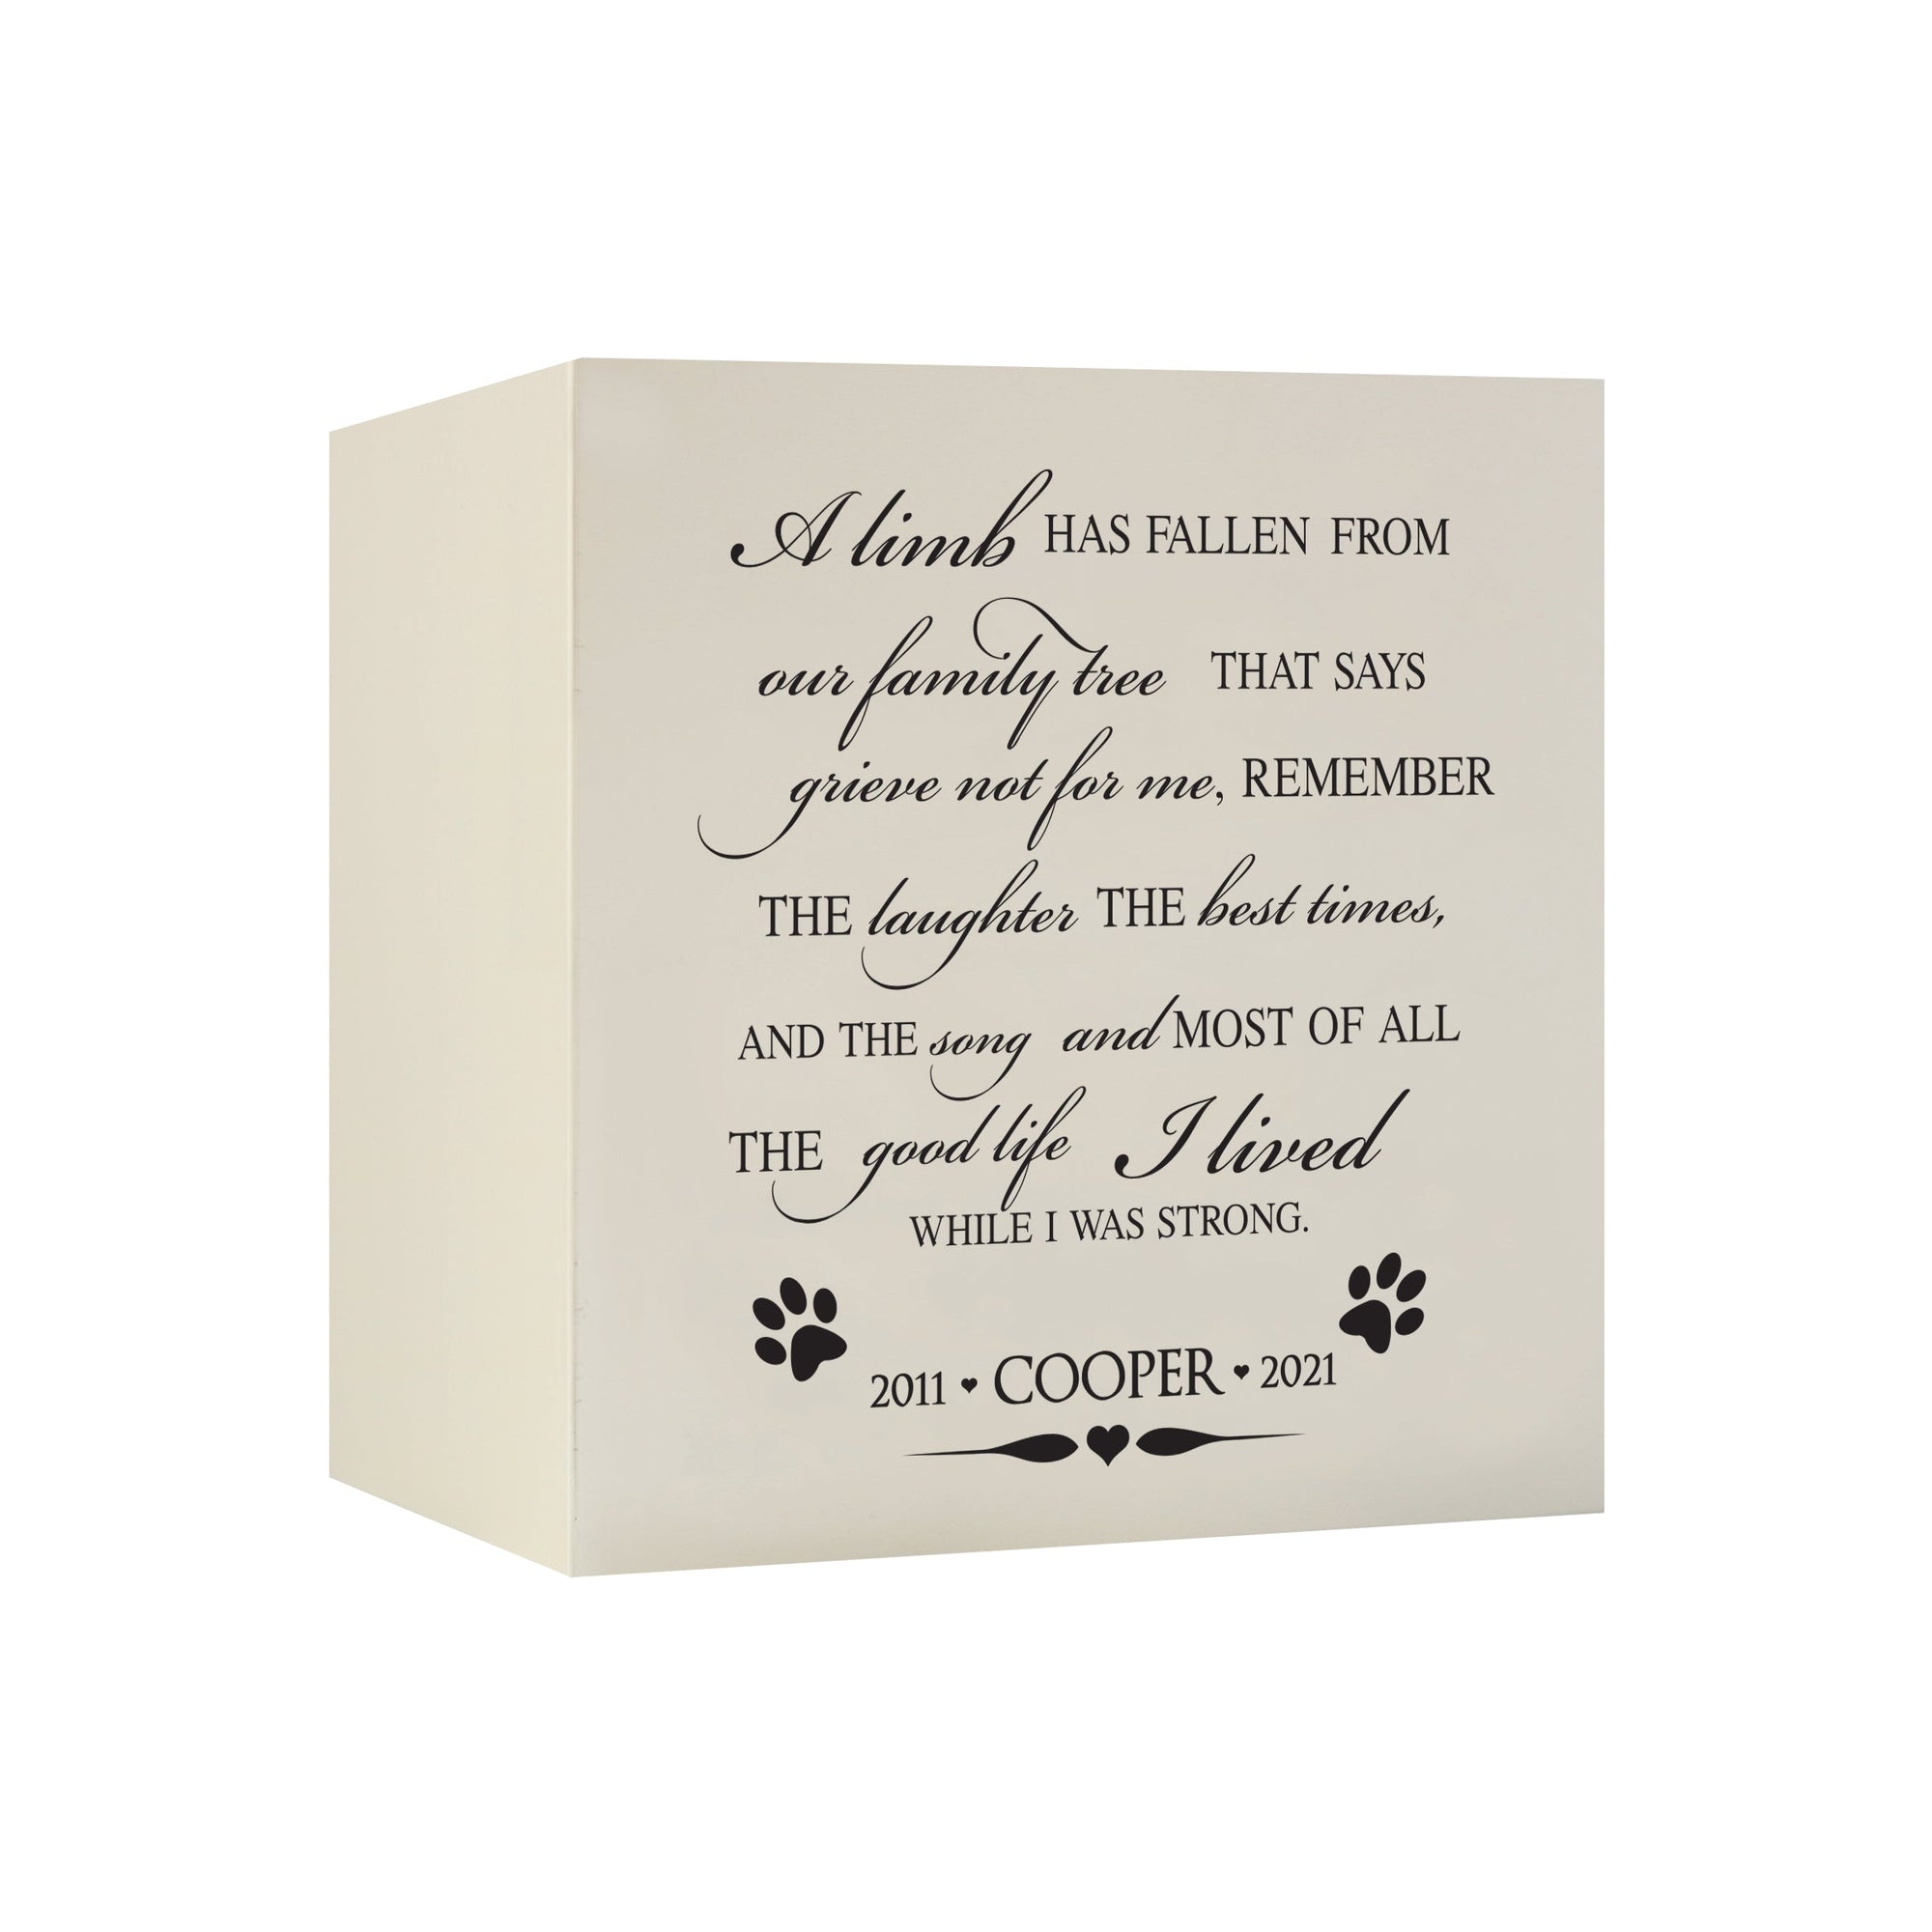 Pet Memorial Shadow Box Cremation Urn for Dog or Cat - A Limb Has Fallen From Our Family Tree